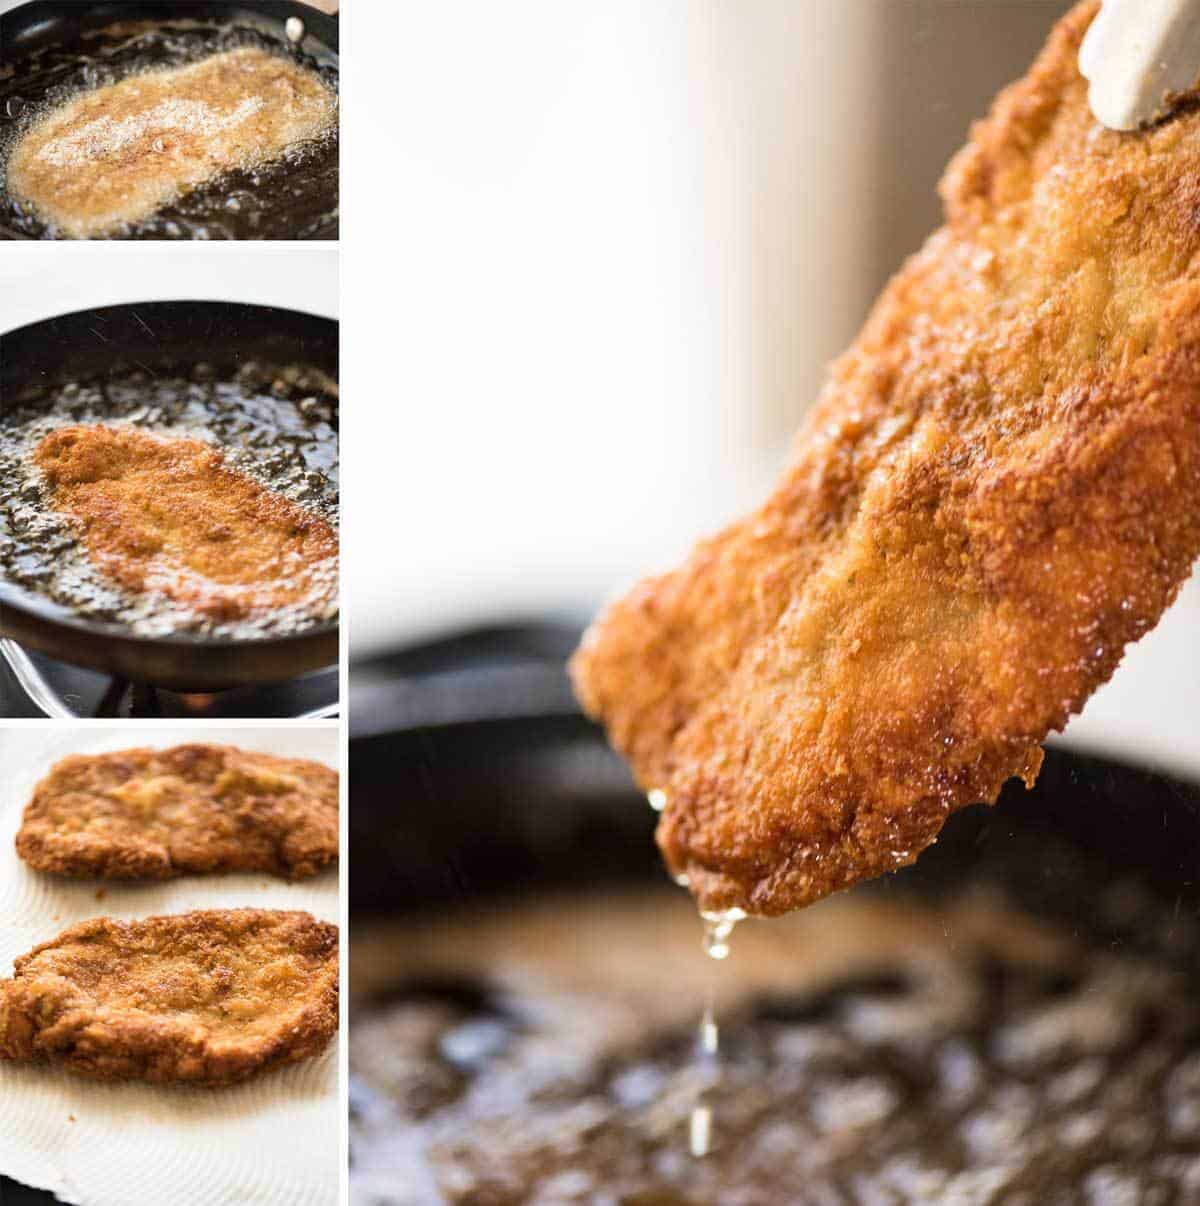 There is nothing quite like a freshly made schnitzel. Extra crunchy and golden, make this with pork, chicken, veal or turkey. www.recipetineats.com